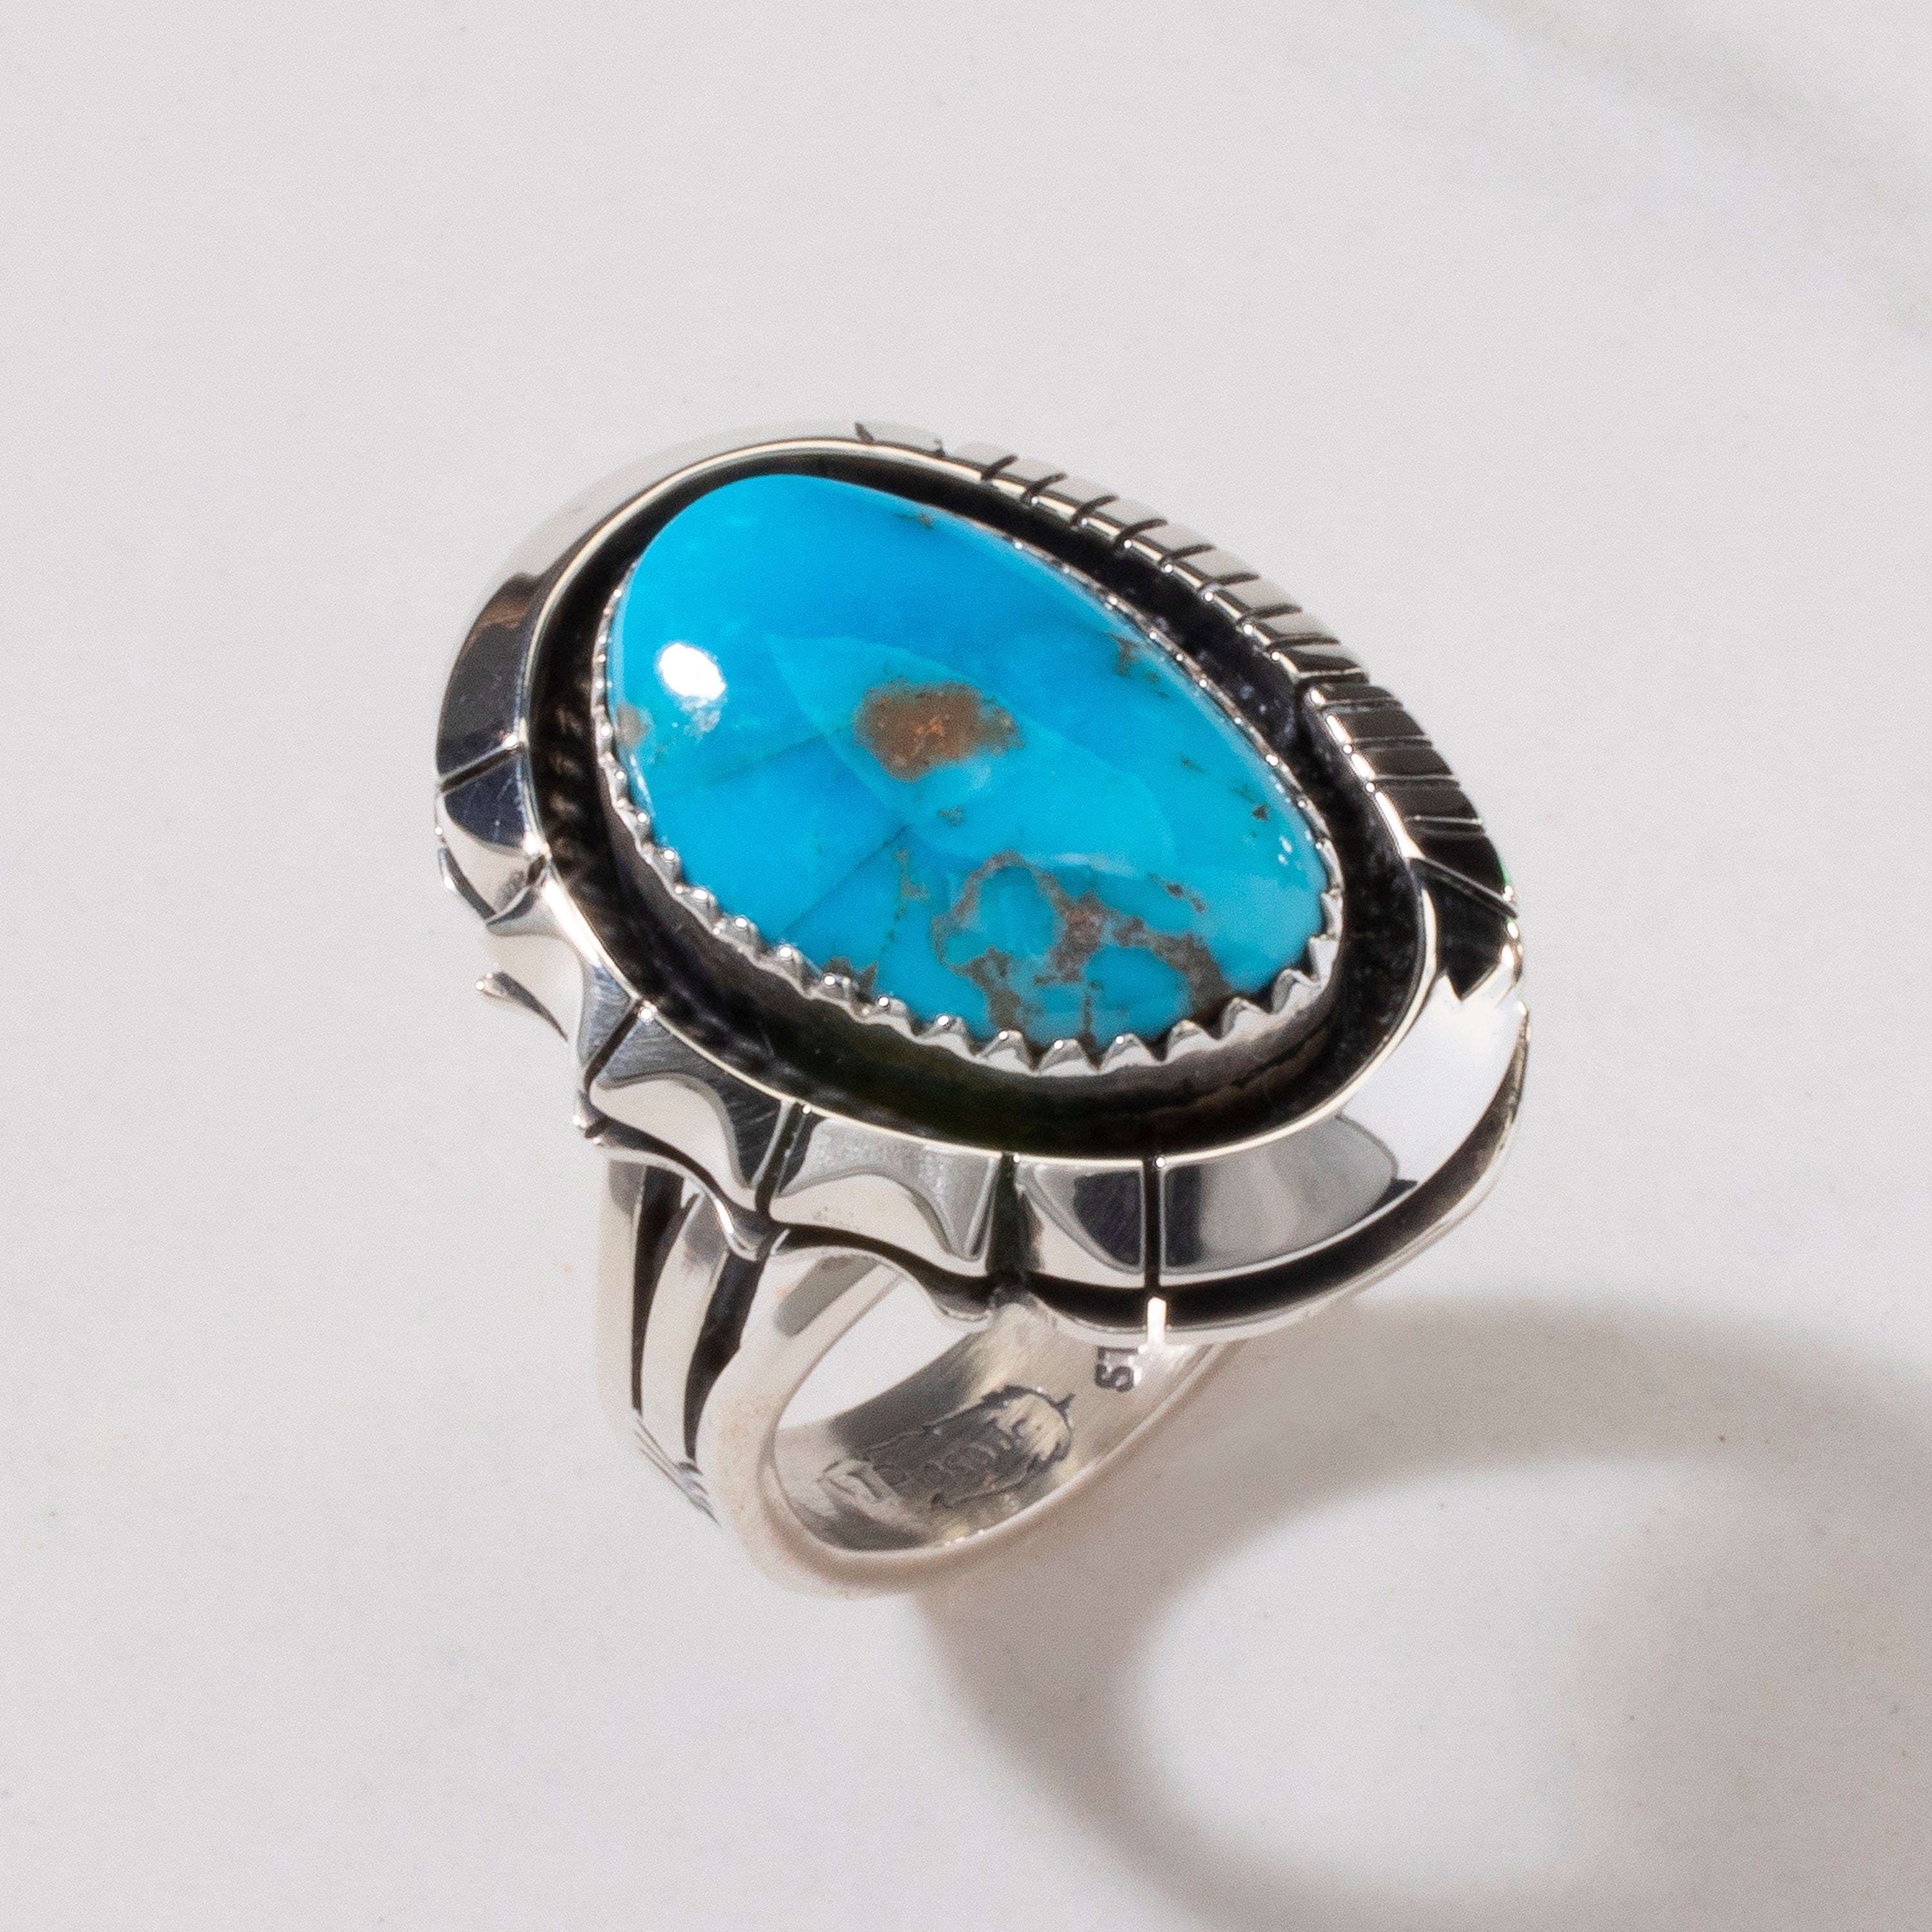 Kalifano Native American Jewelry 7 Sleeping Beauty Turquoise Navajo USA Native American Made 925 Sterling Silver Ring NAR700.037.7